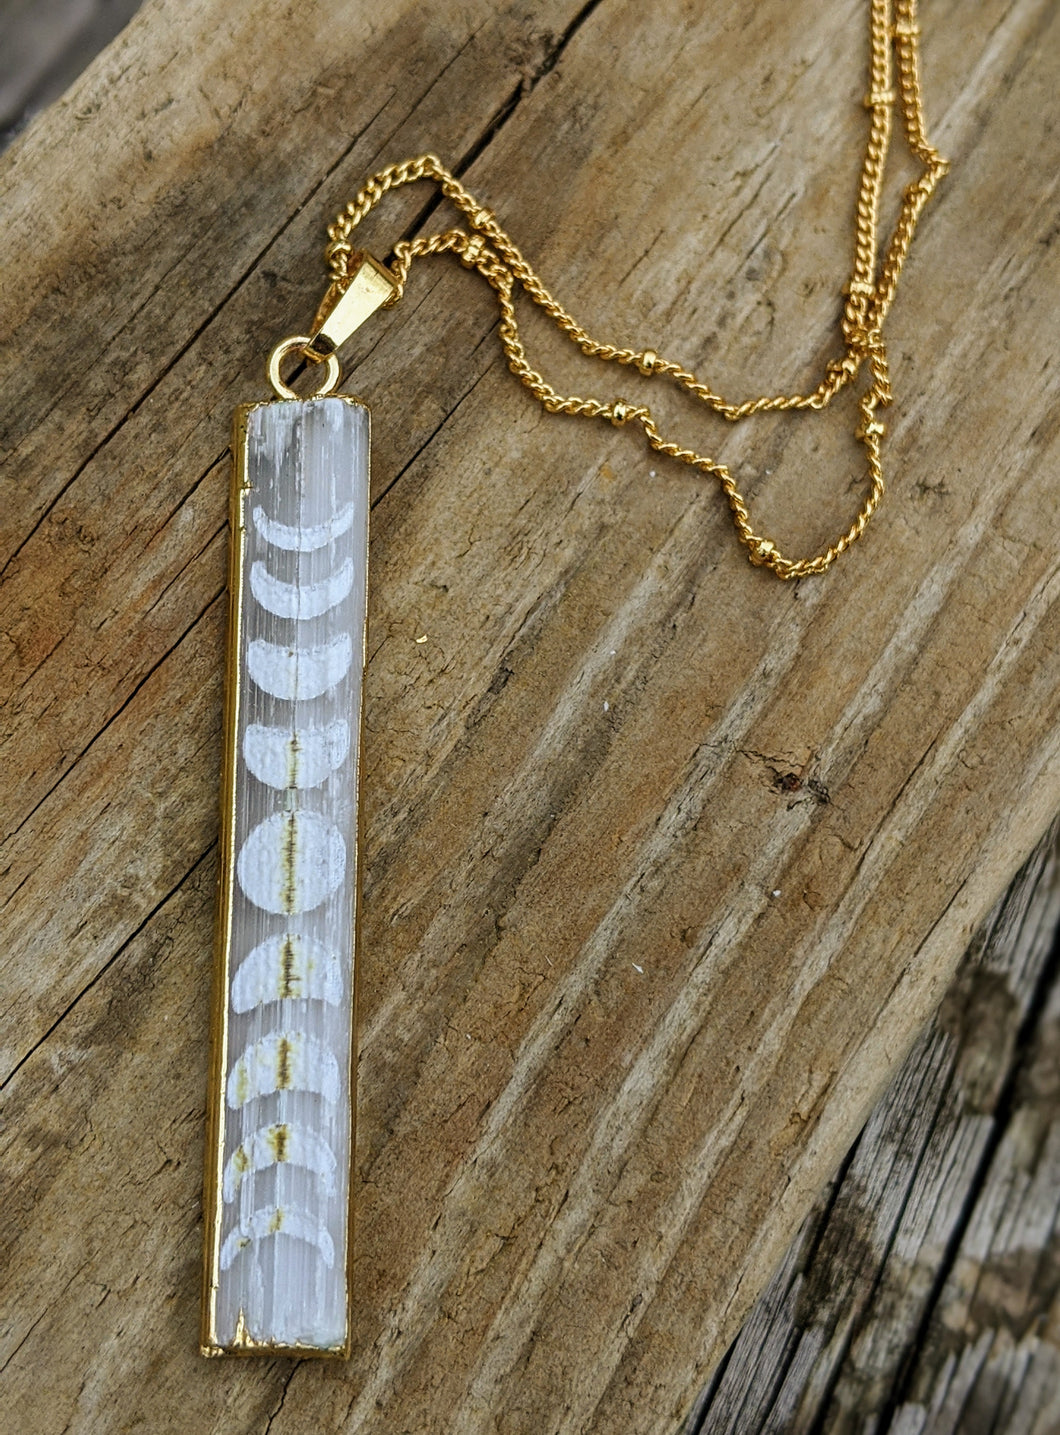 Slightly Imperfect - Engraved Selenite Moon Phase Necklace - Vertical Bar I - Minxes' Trinkets